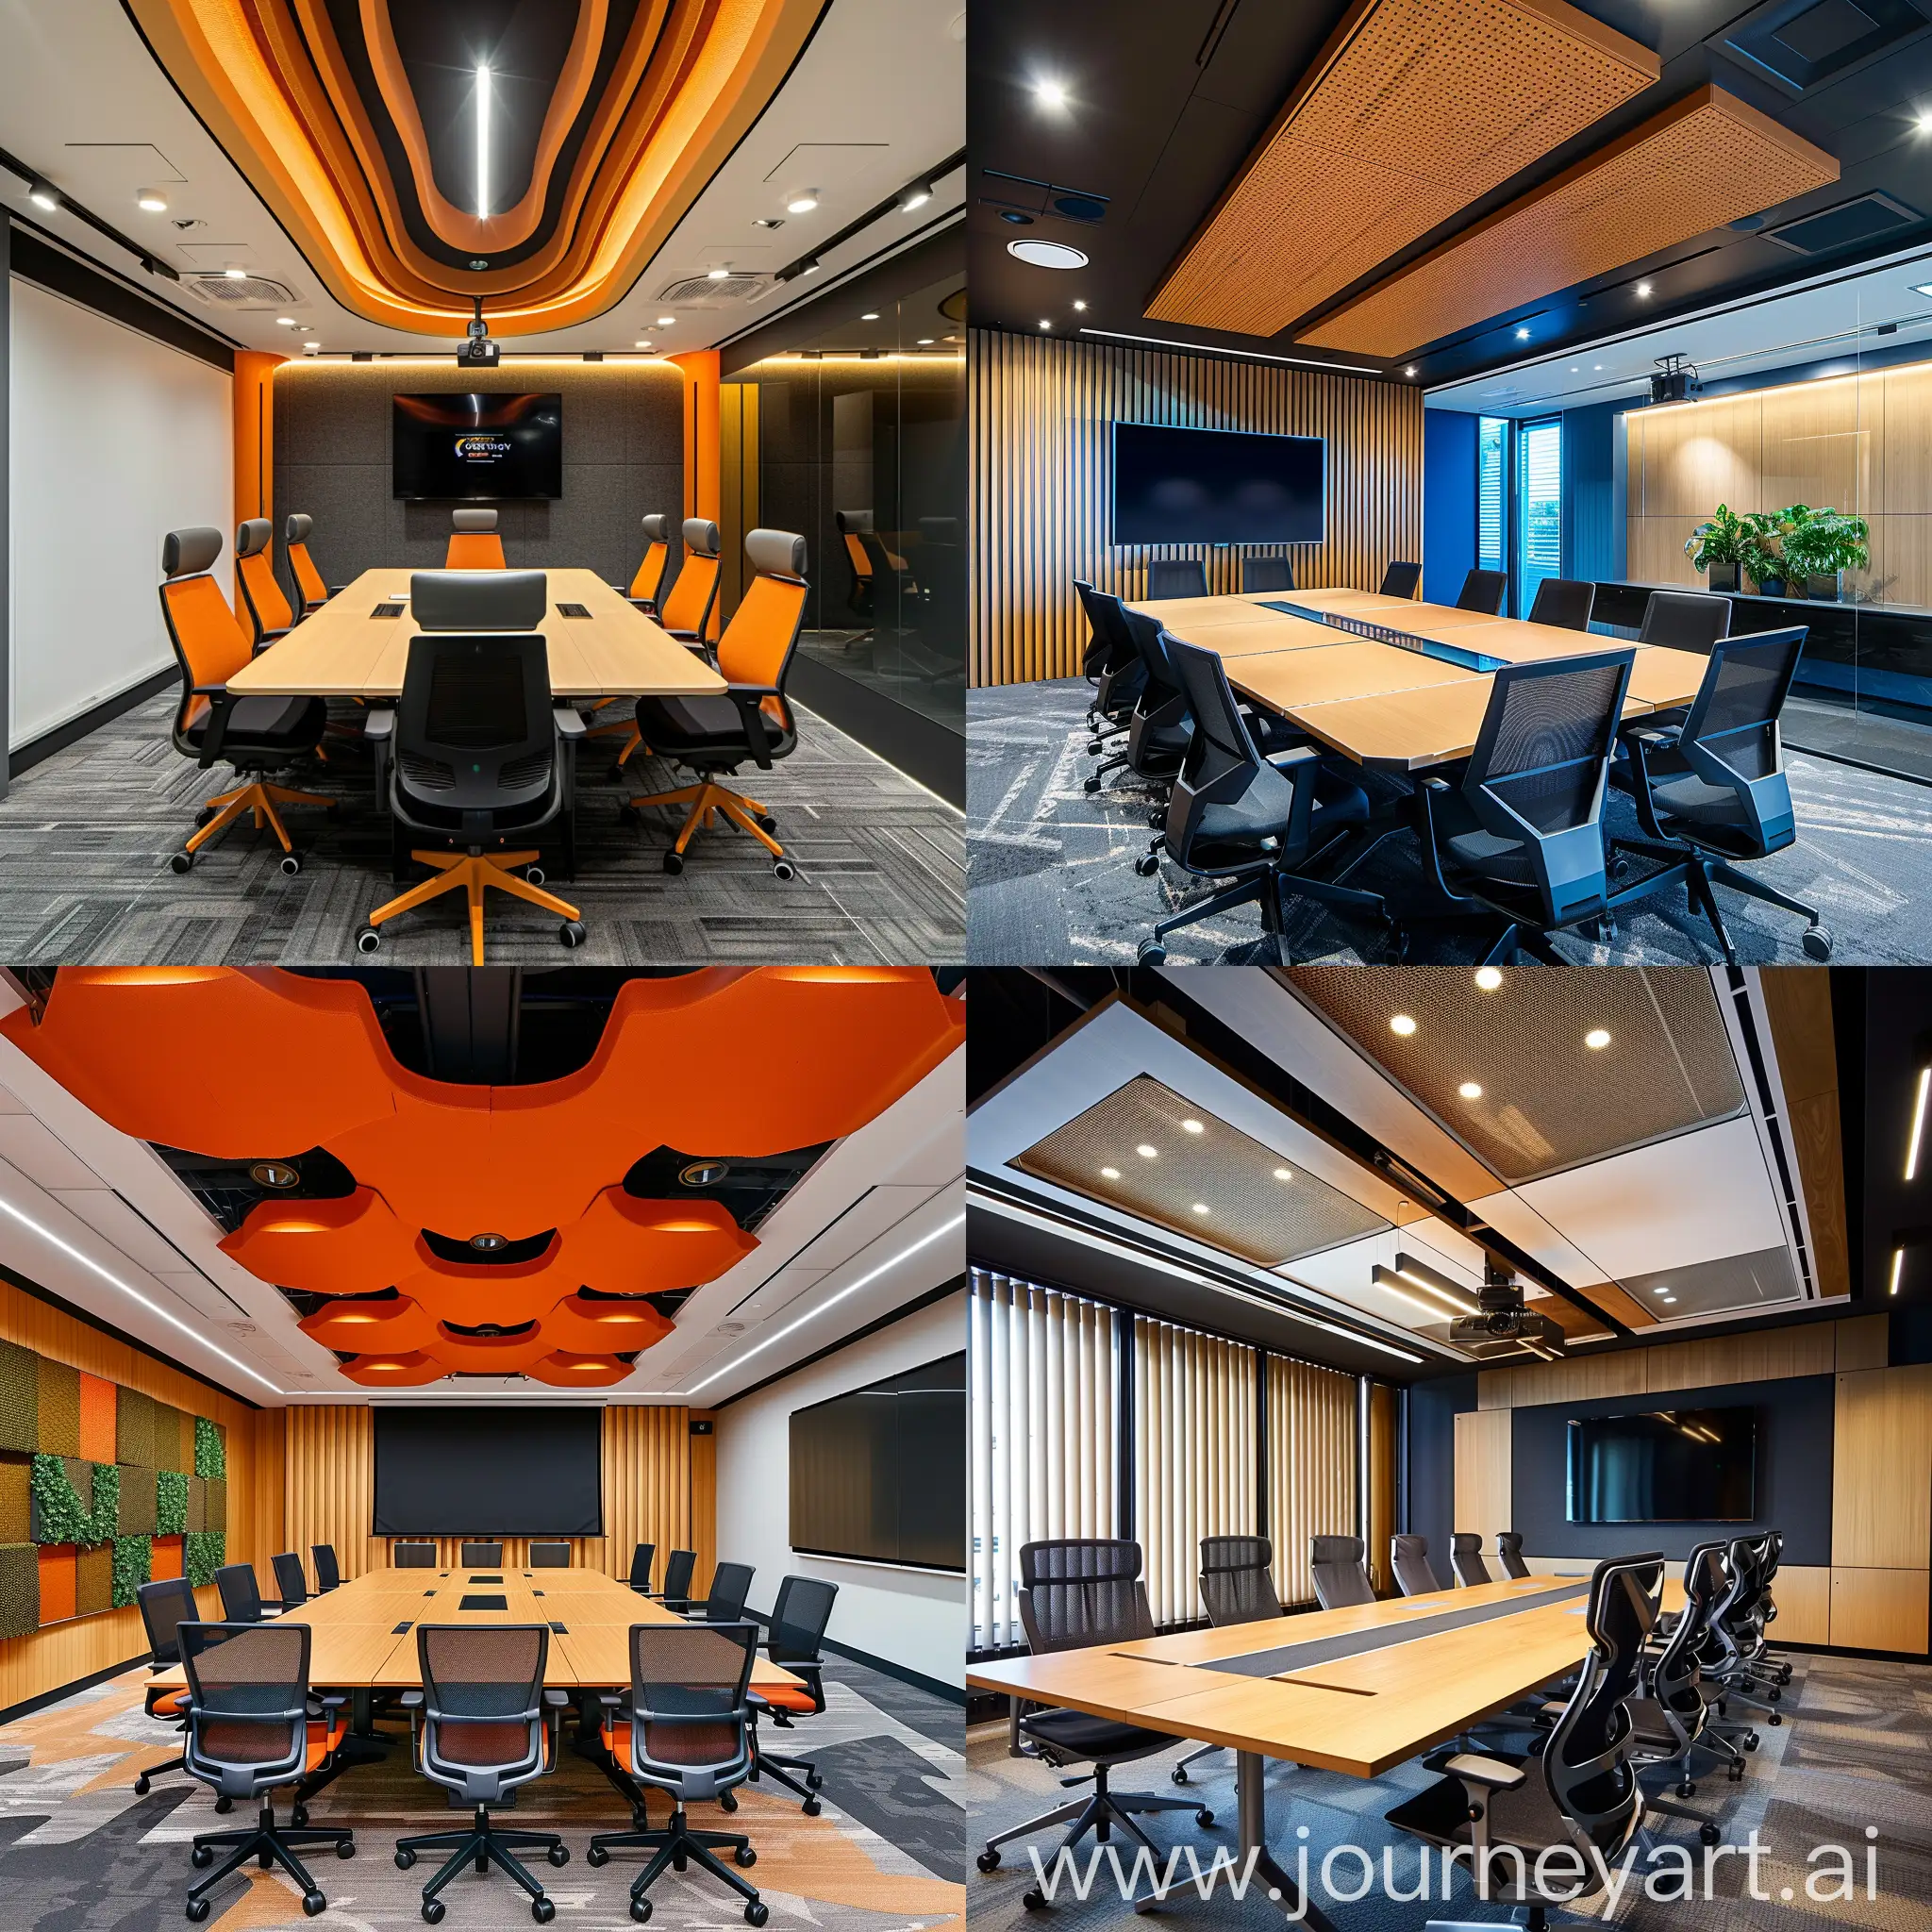 fabric house, board room inspiration with  flexible seating configuration, video conferencing, facilities, teaching wall, wall finishes, floor & Ceiling finishes, lighting ideas.